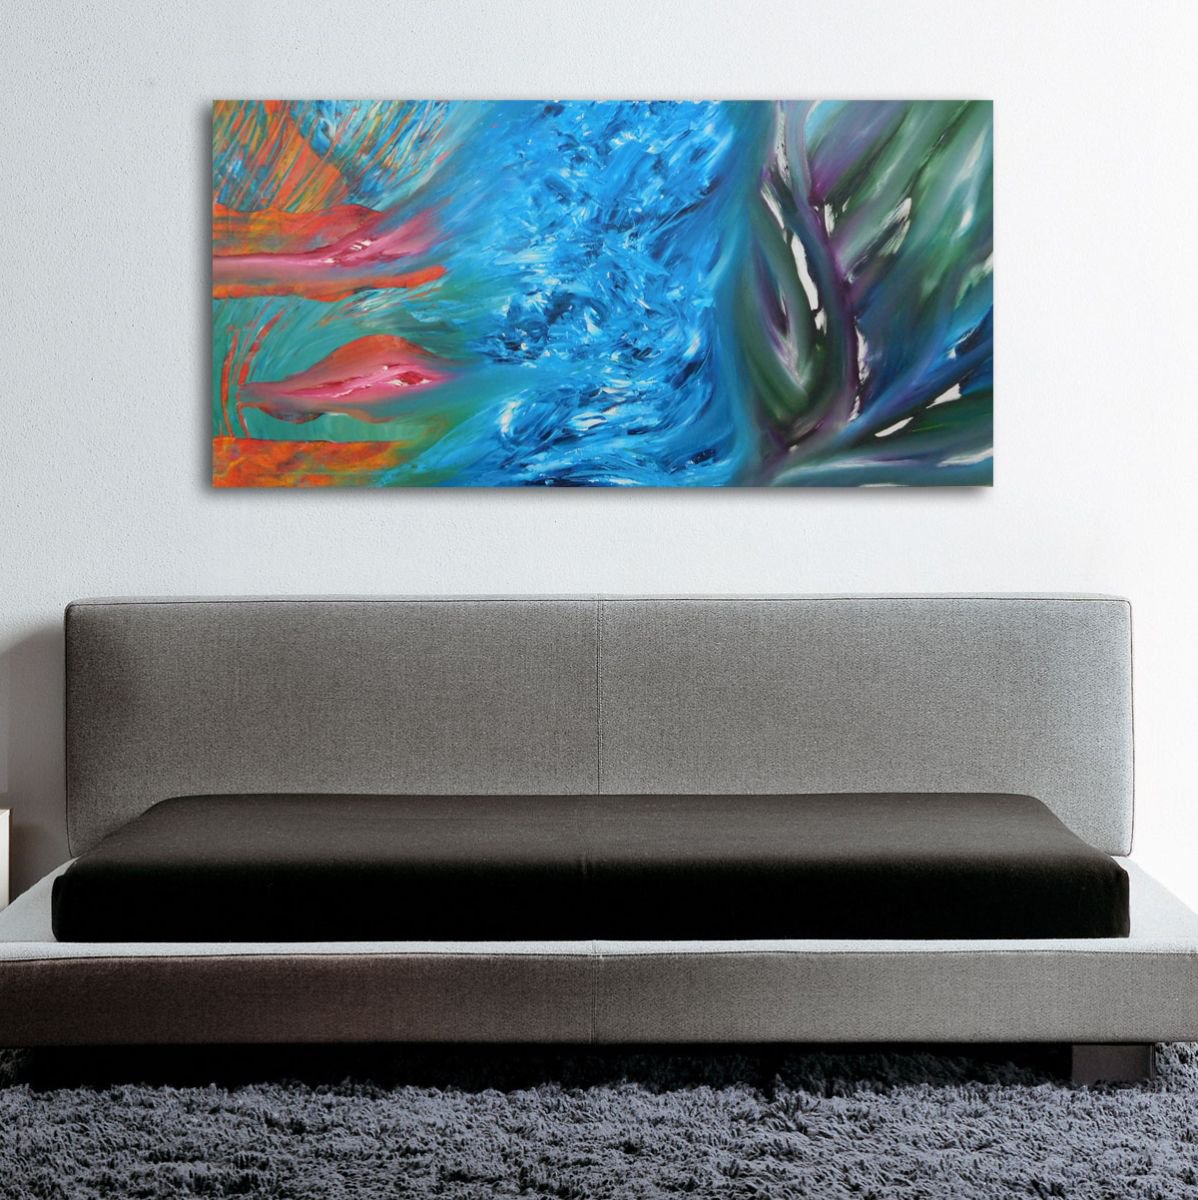 The hope of dissent, 120x60 cm, LARGE XXL, Original abstract oil painting by Davide De Palma